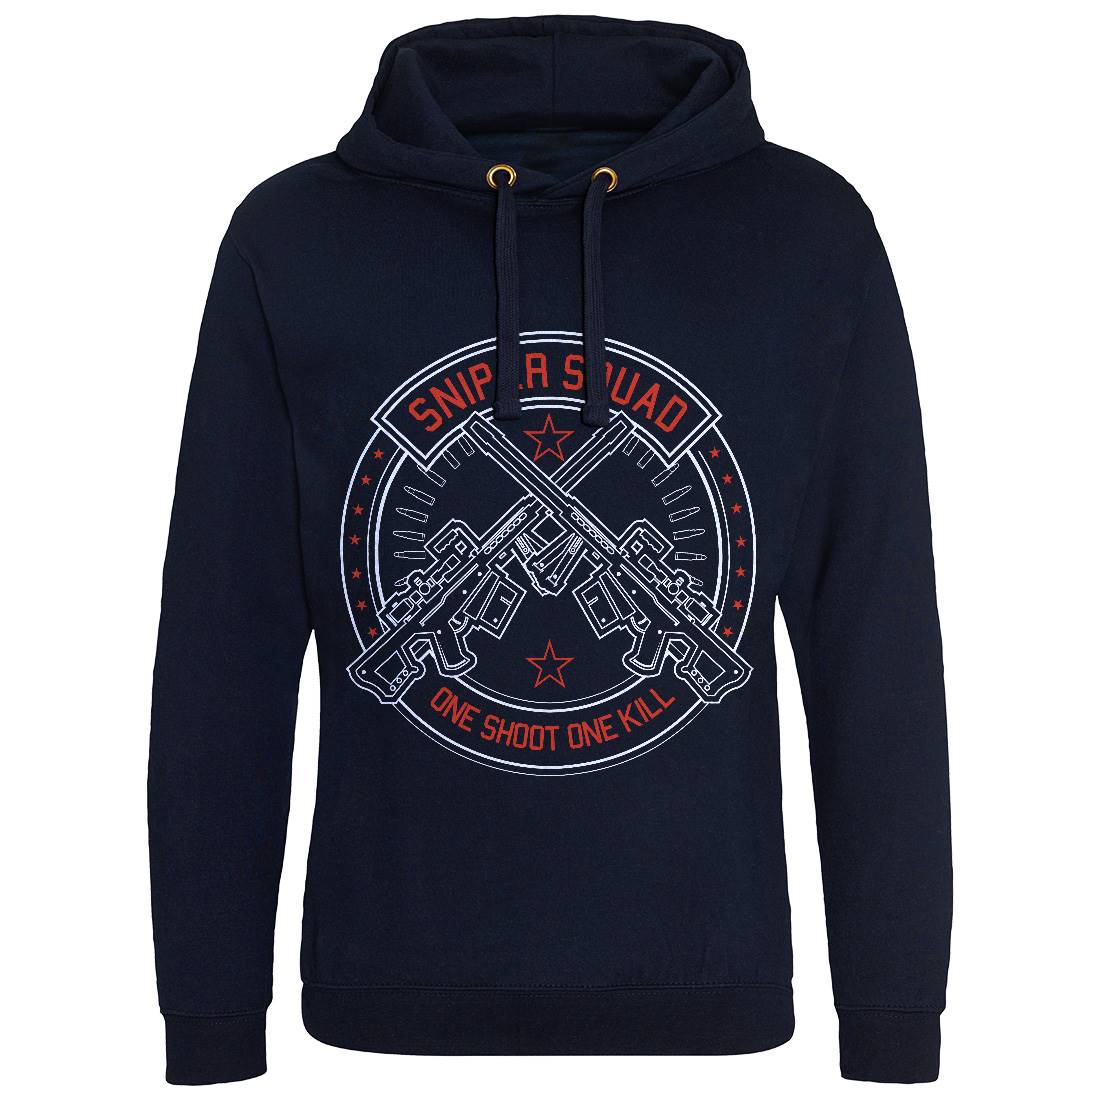 Sniper Squad Mens Hoodie Without Pocket Army A279